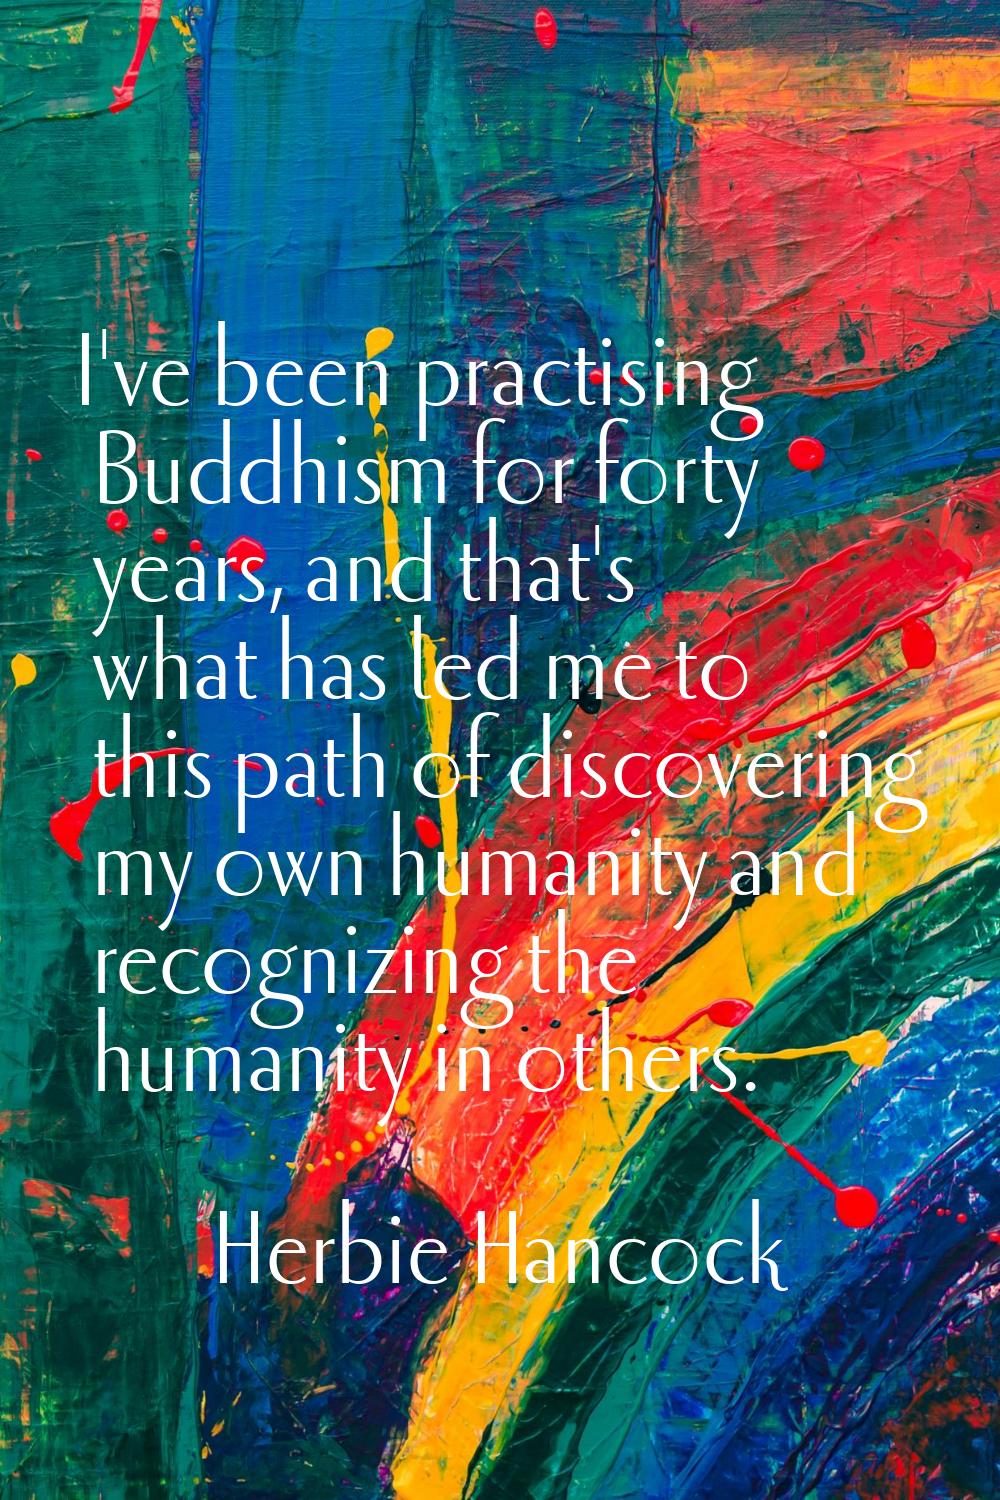 I've been practising Buddhism for forty years, and that's what has led me to this path of discoveri